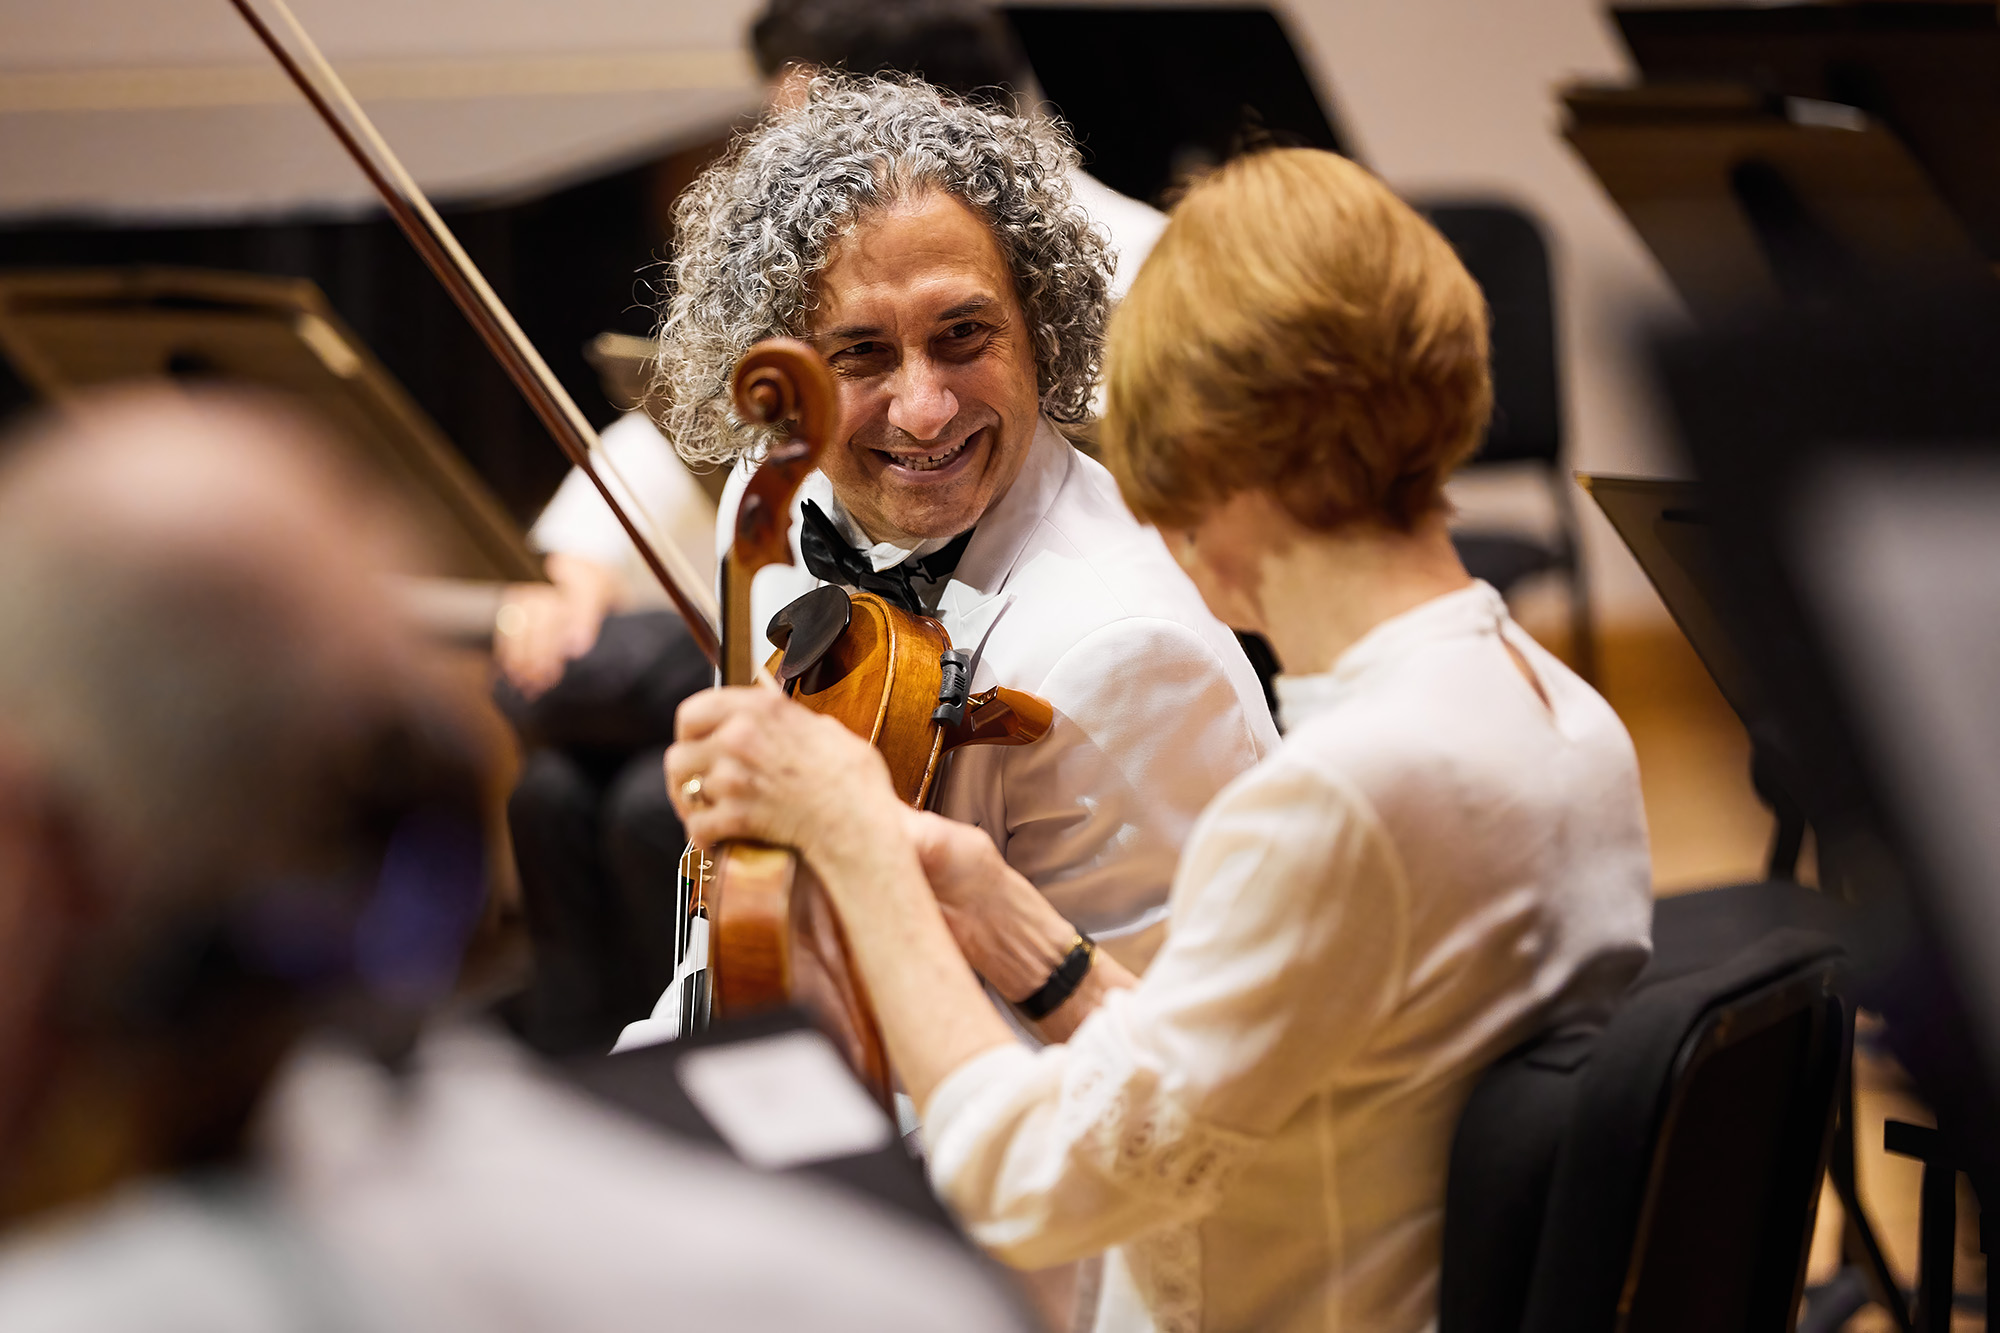 Photo of a smiling orchestra member with a violin, looking at the musician seated next to him.